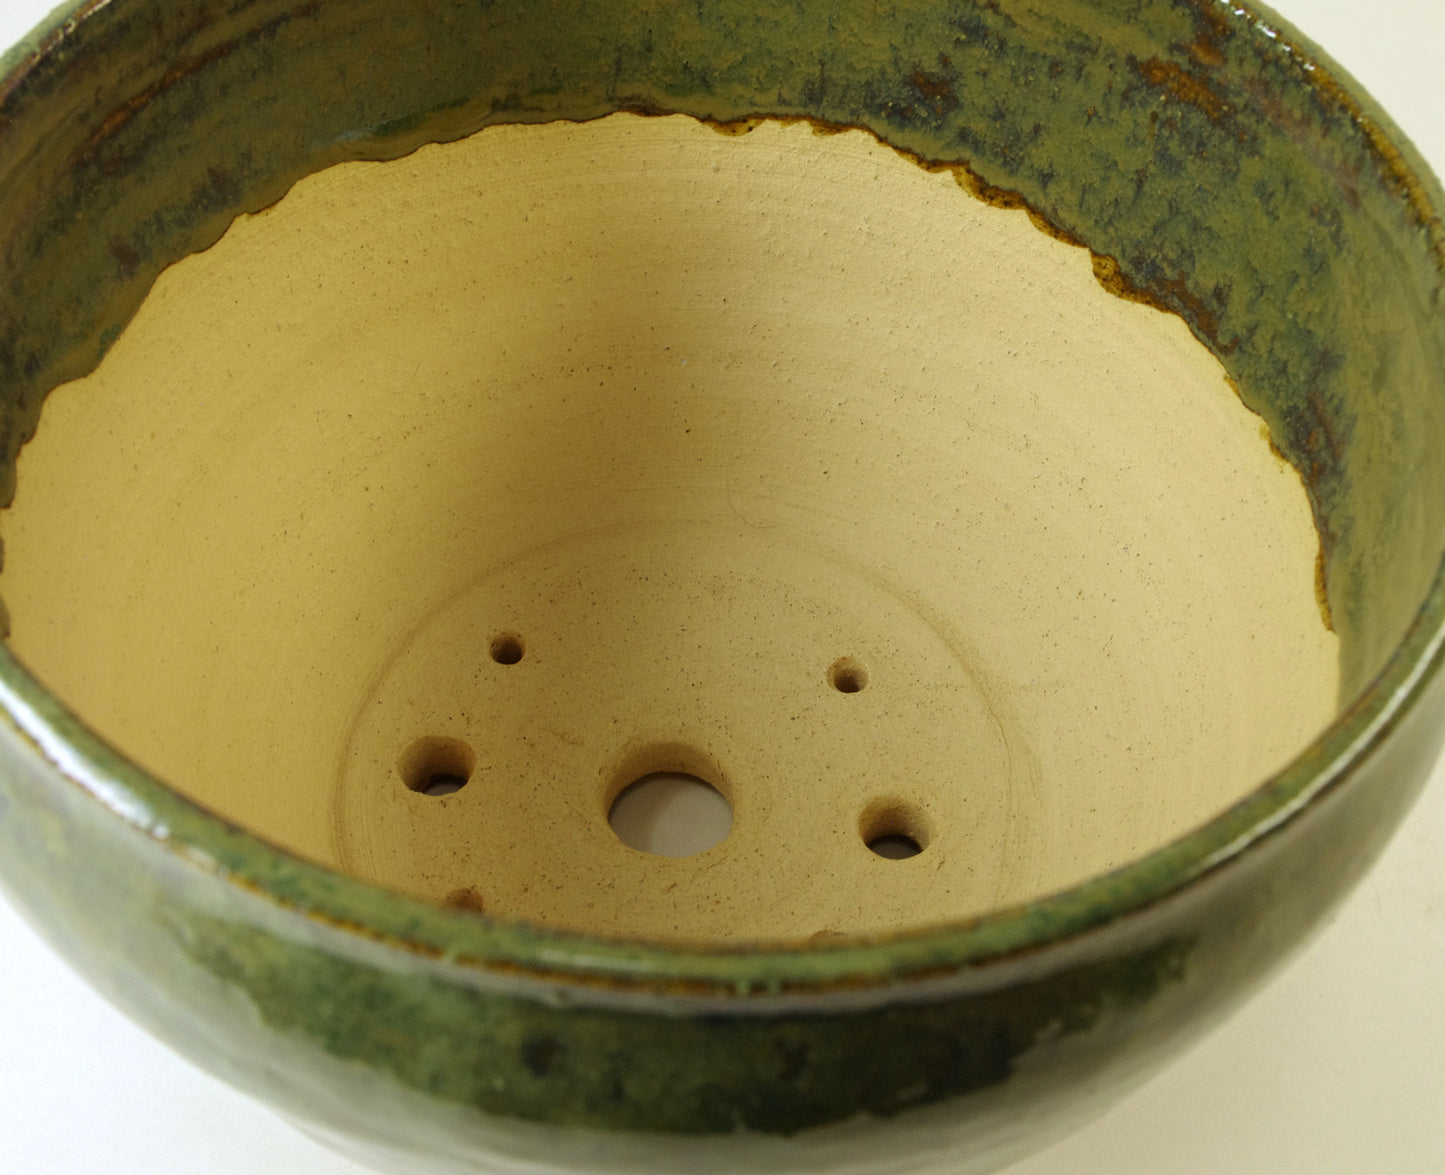 2110, Hand Thrown Stoneware Bonsai Pot,  Greens, Tans  6 3/8 x 4 1/8, With Extra Wire Holes